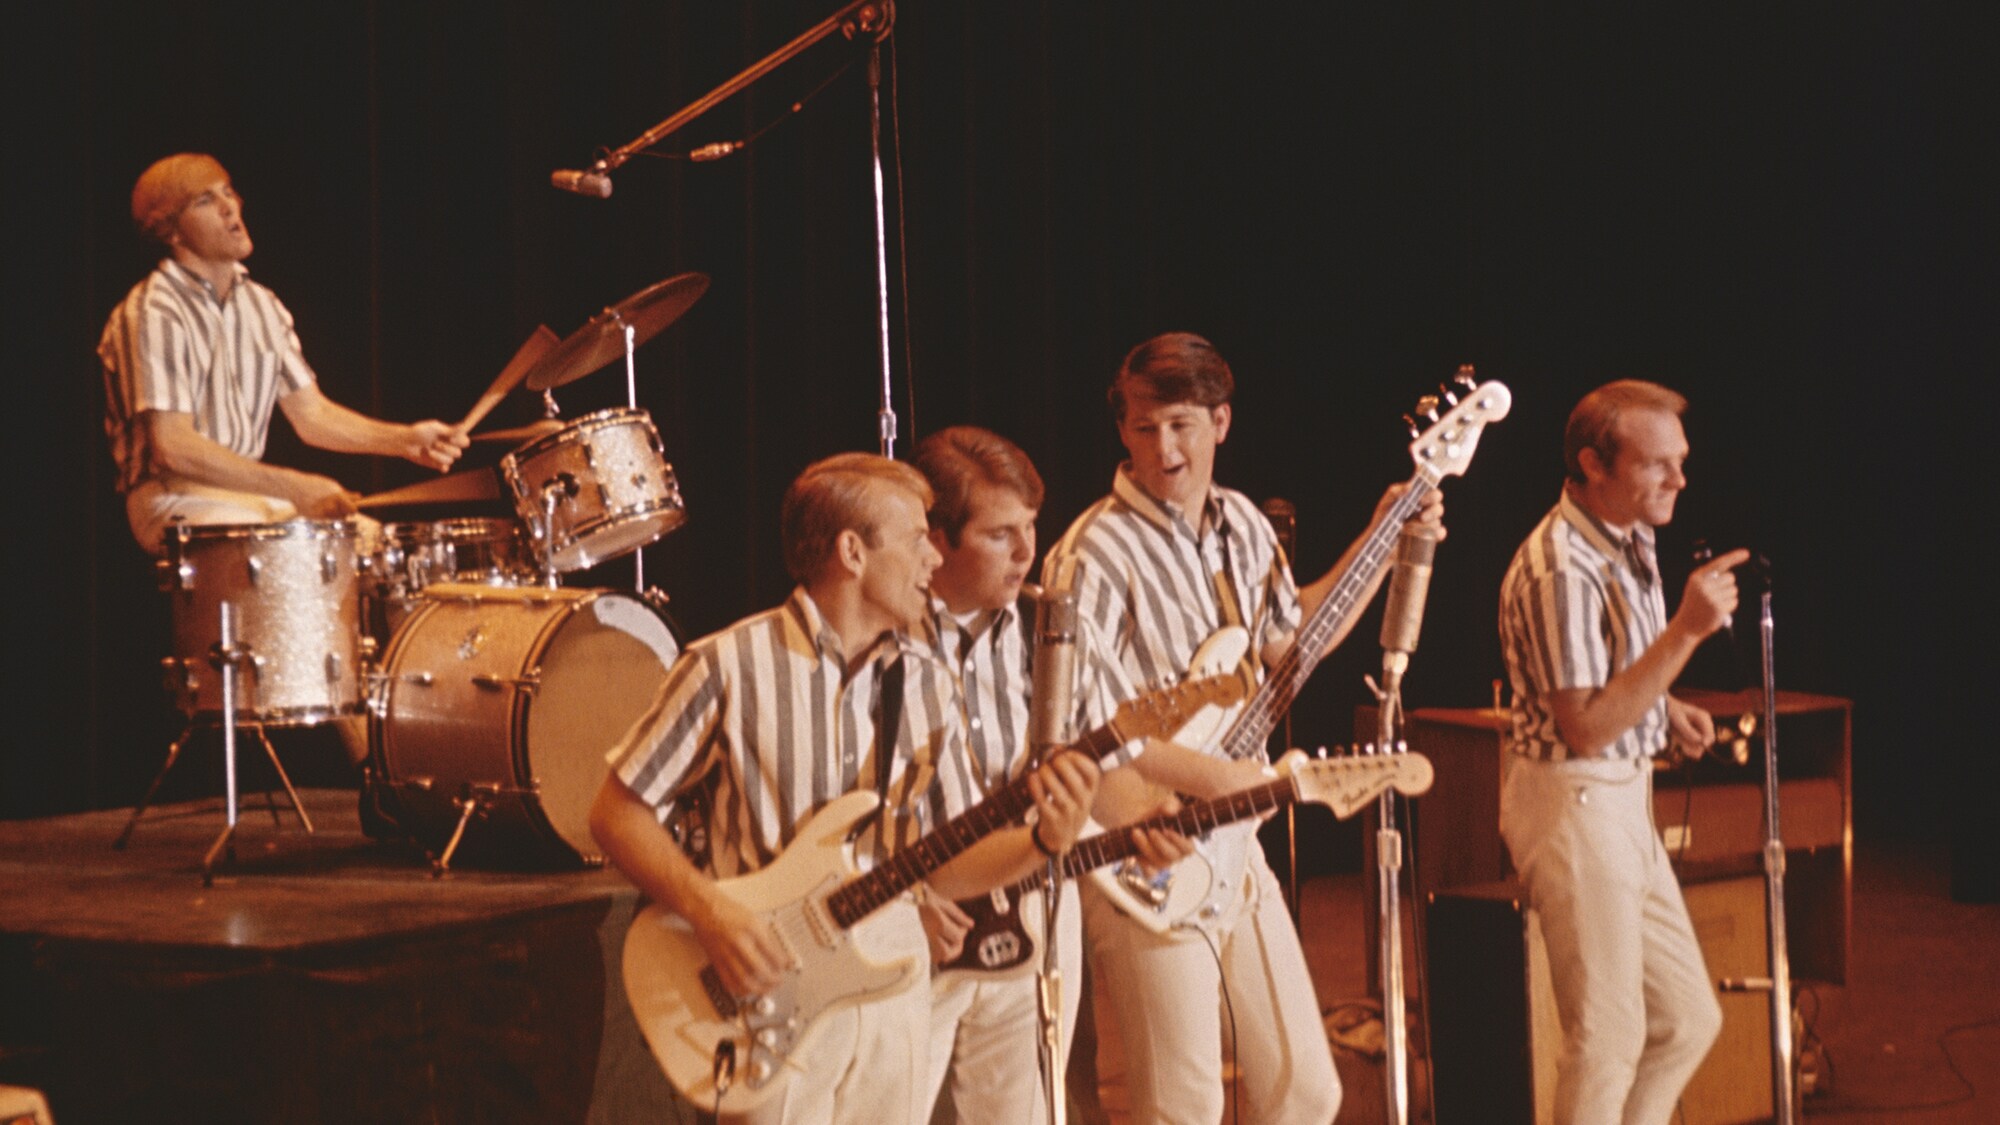 CALIFORNIA - CIRCA 1964:  Rock and roll band "The Beach Boys" perform onstage in circa 1964 in California. (L-R) Dennis Wilson, Al Jardine, Carl Wilson, Brian Wilson, Mike Love.  (Photo by Michael Ochs Archives/Getty Images)